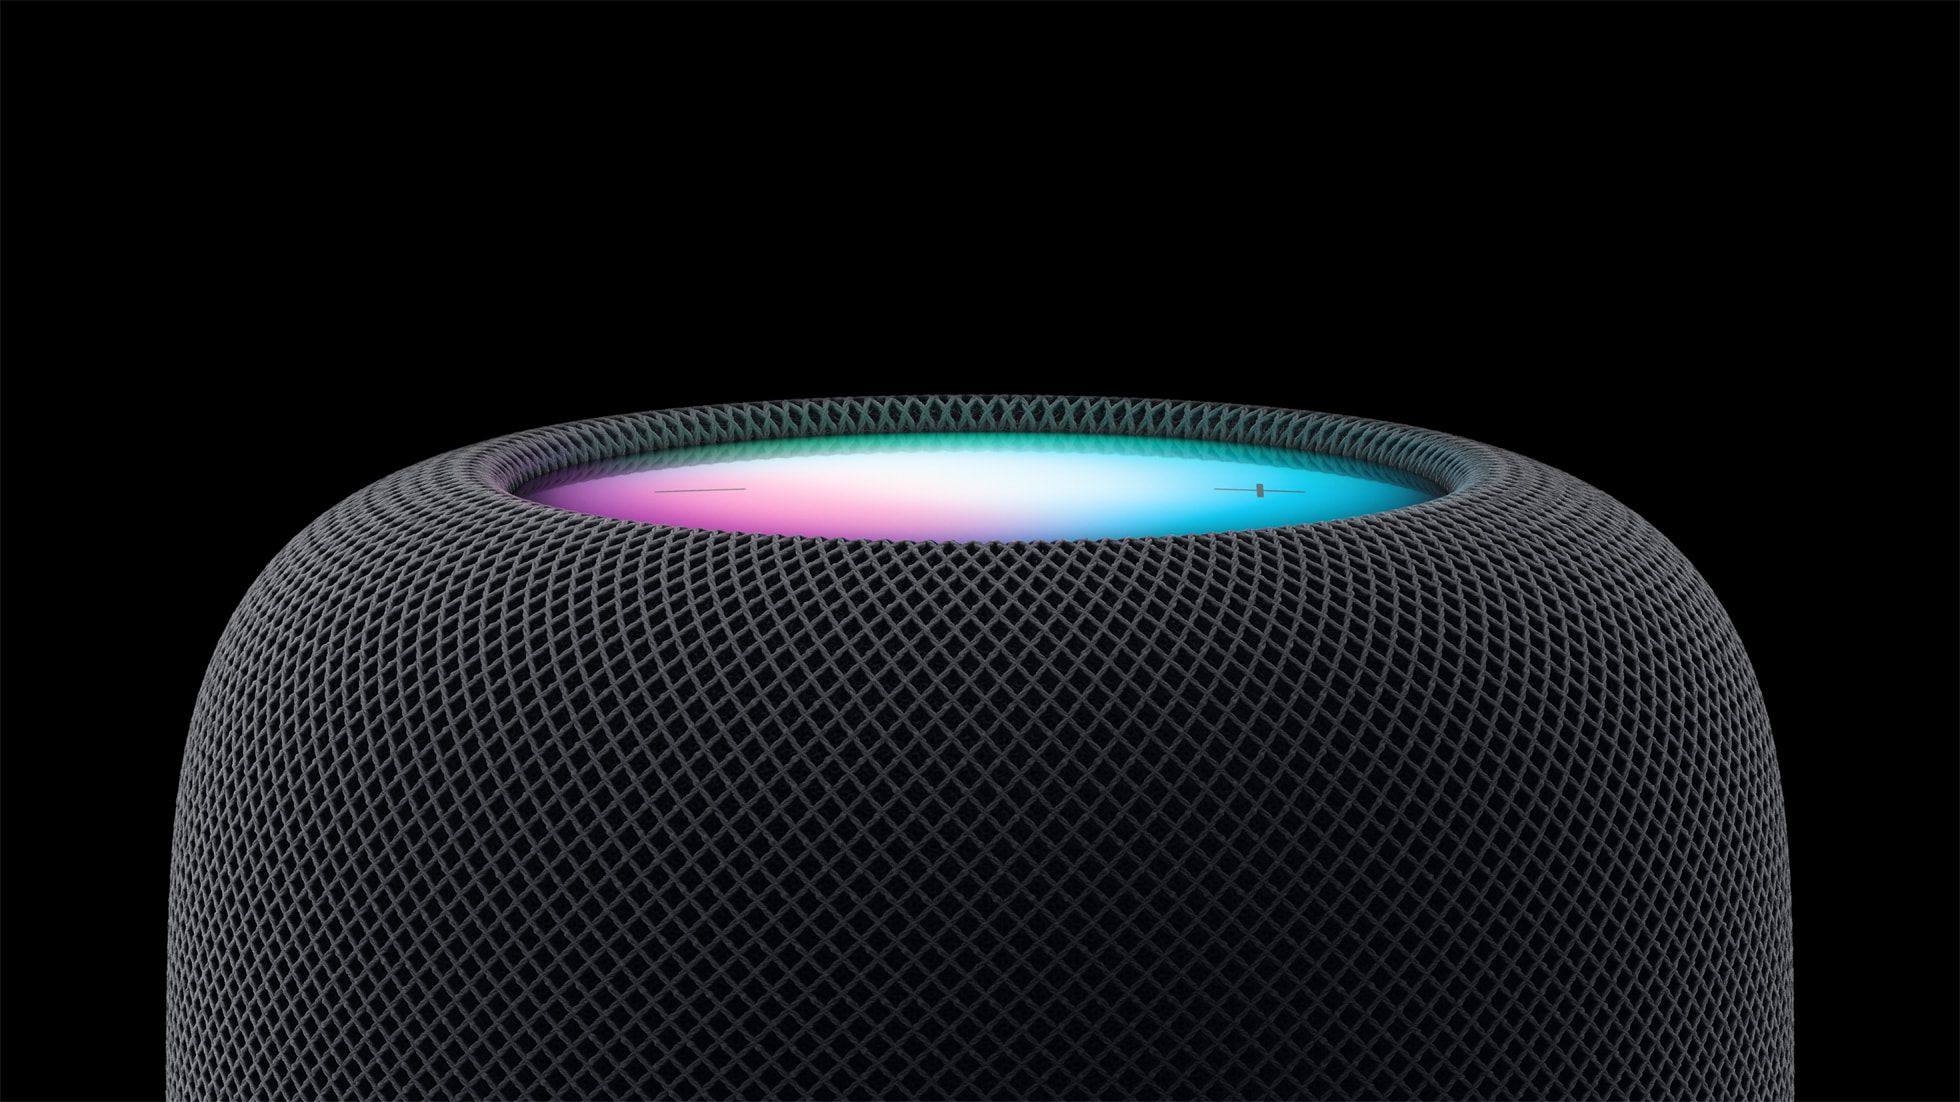 Apple Announces New HomePod for $299 With Full-Size Design, S7 